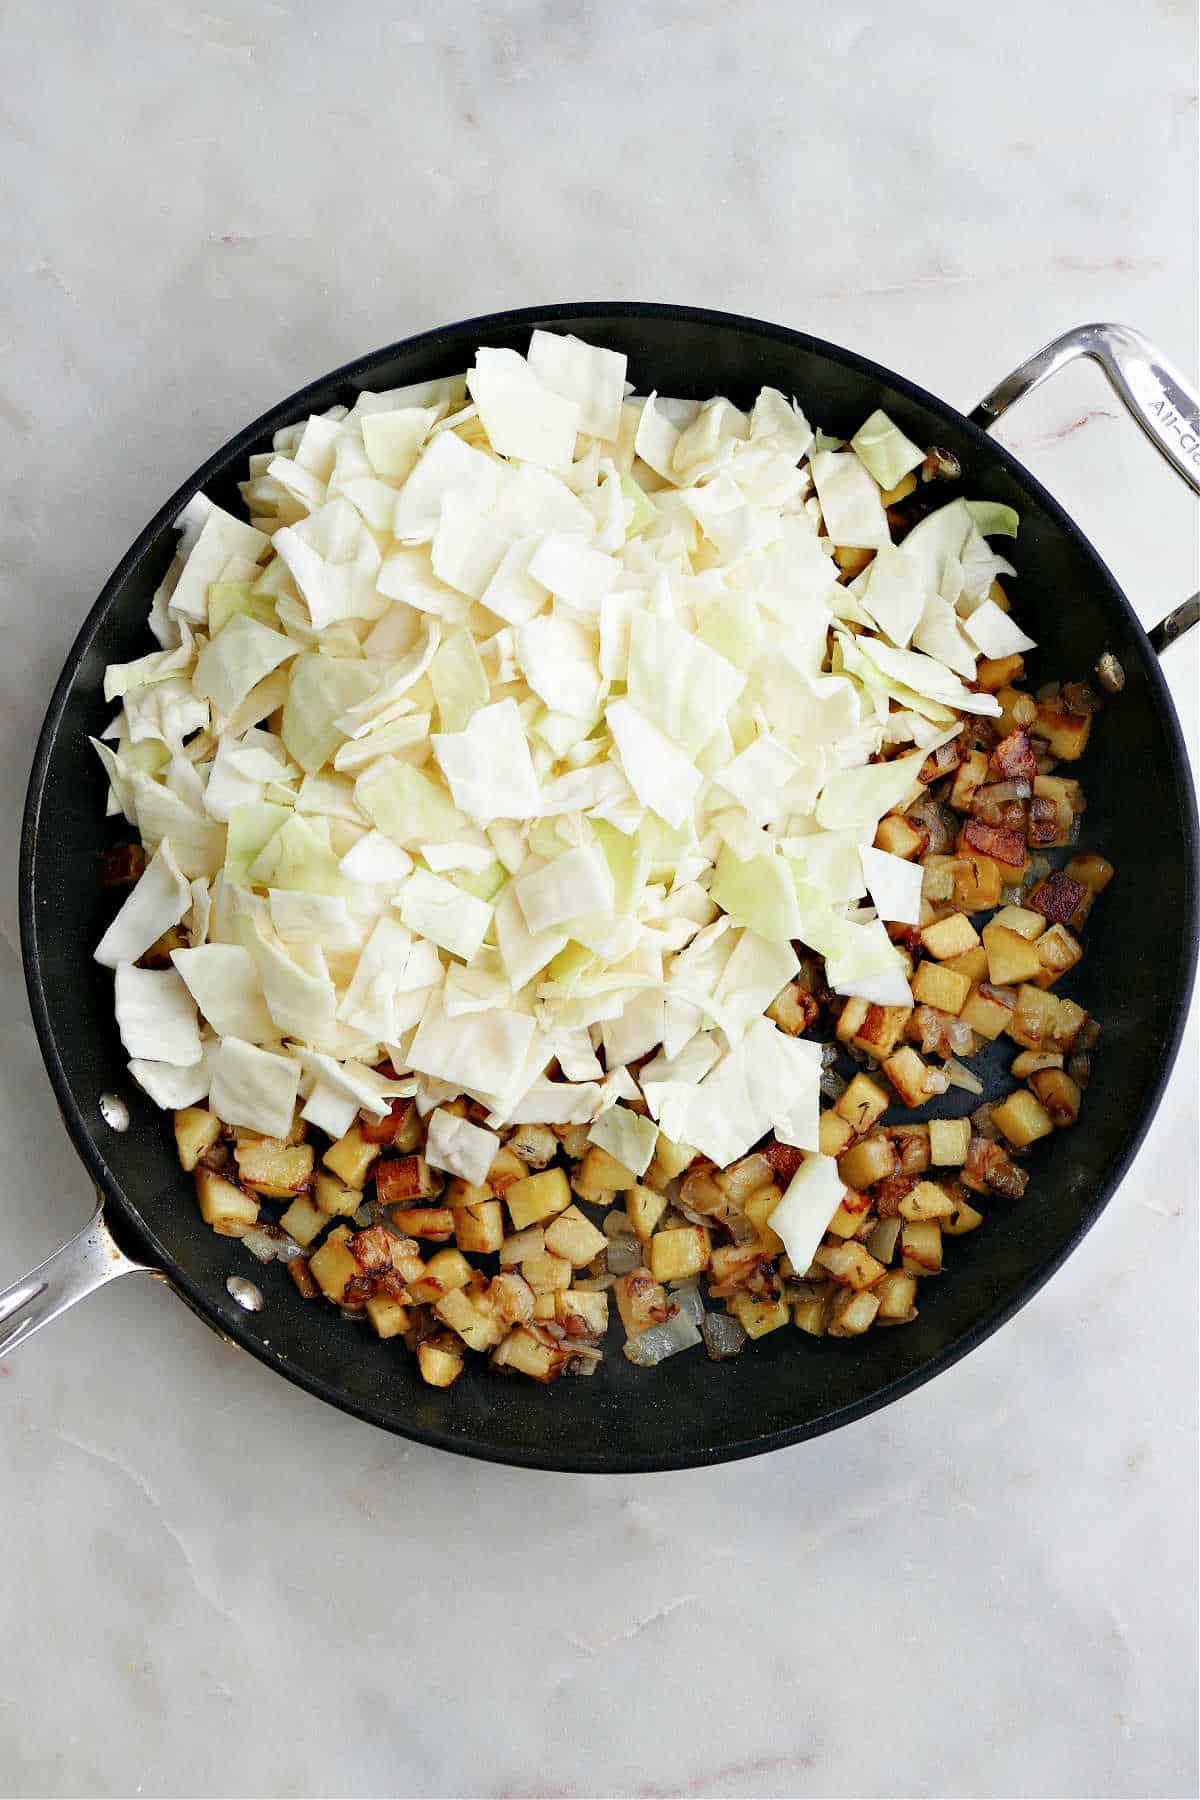 cubed potatoes, sliced cabbage, and onions cooking in a skillet on a counter